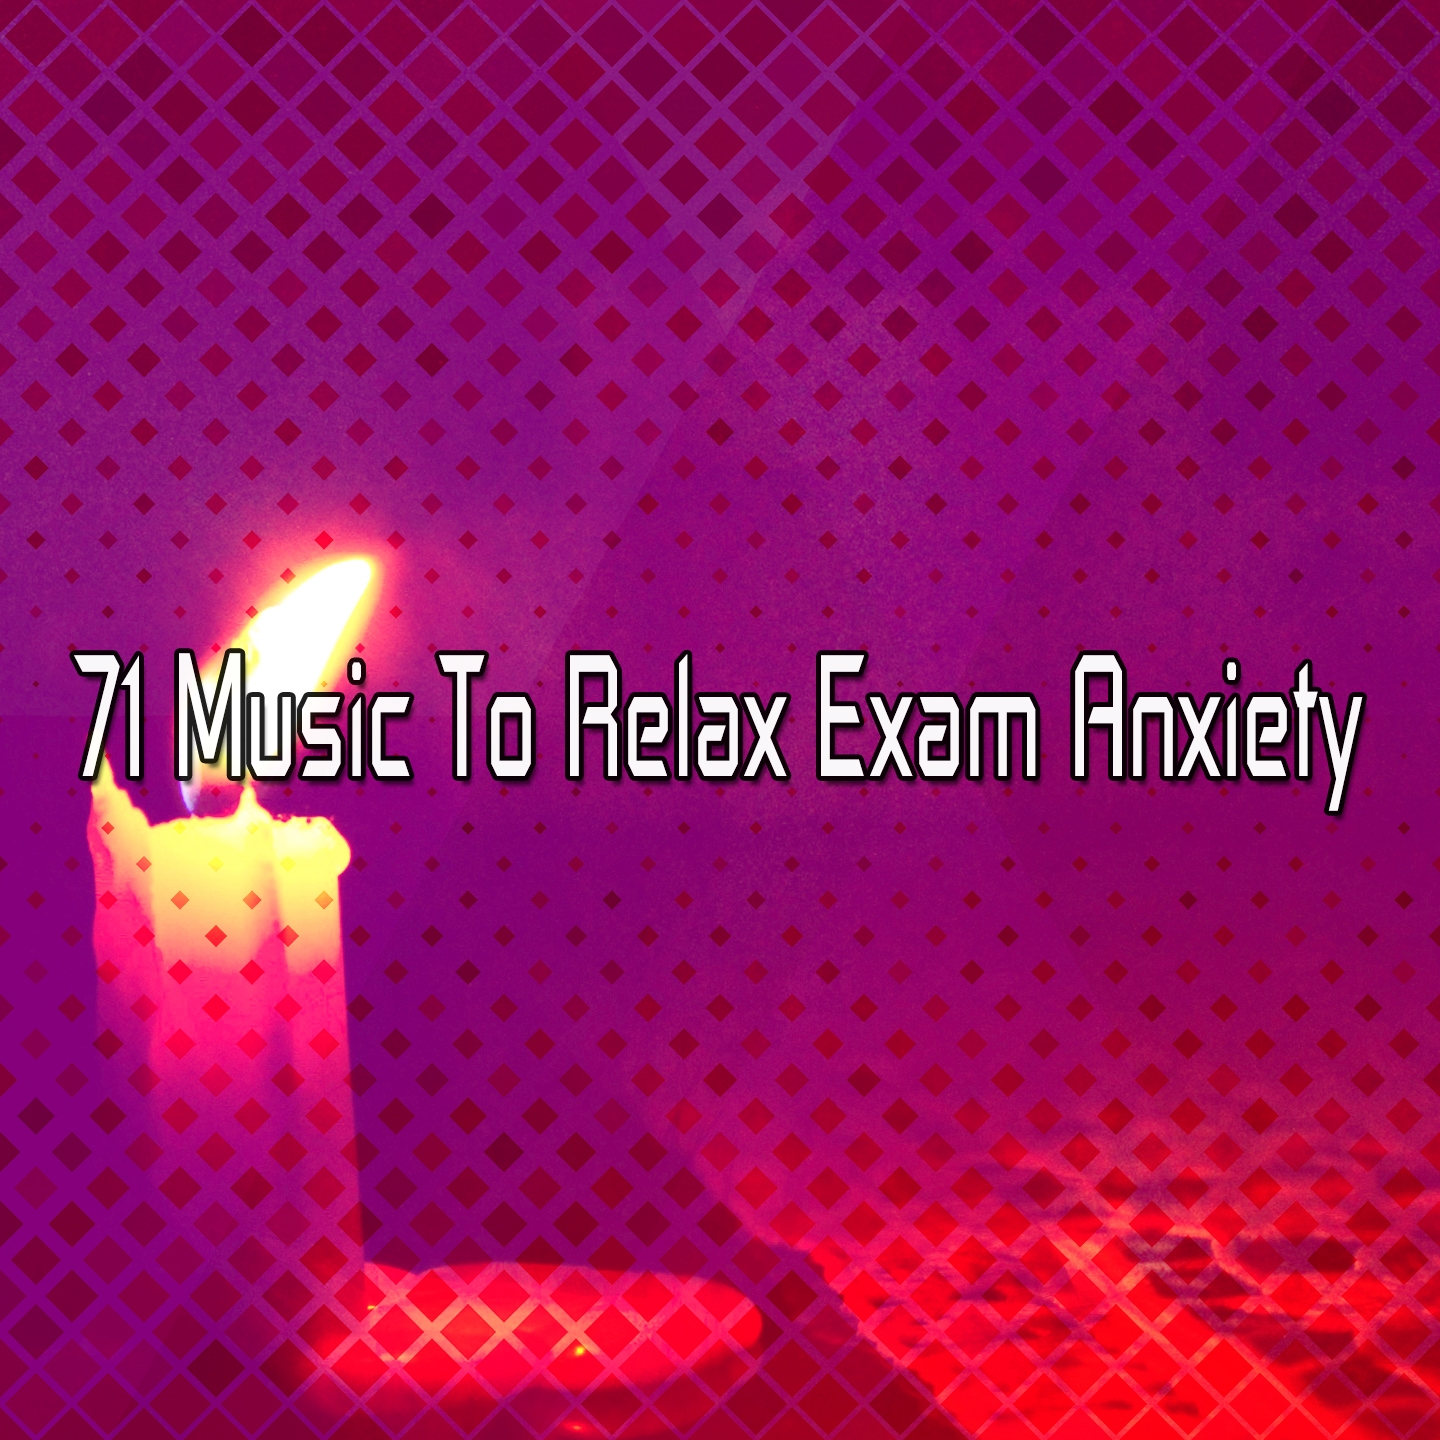 71 Music To Relax Exam Anxiety